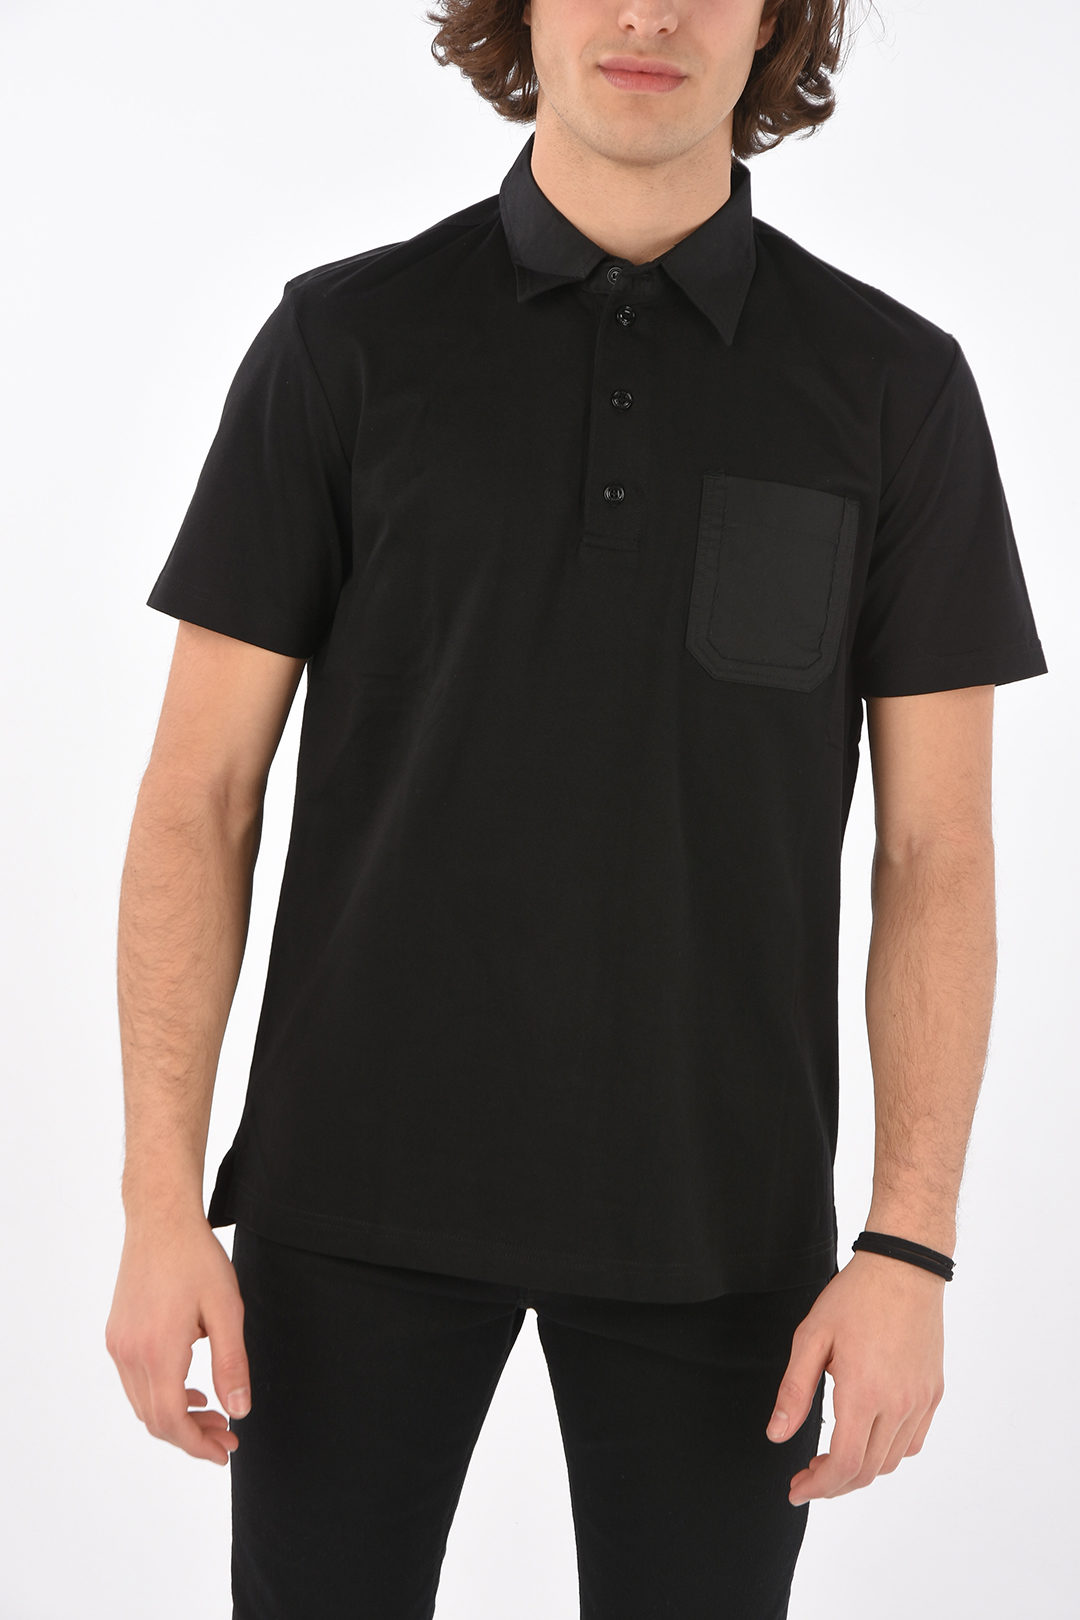 Diesel jersey T-ORACLE polo shirt with breast pocket men - Glamood Outlet